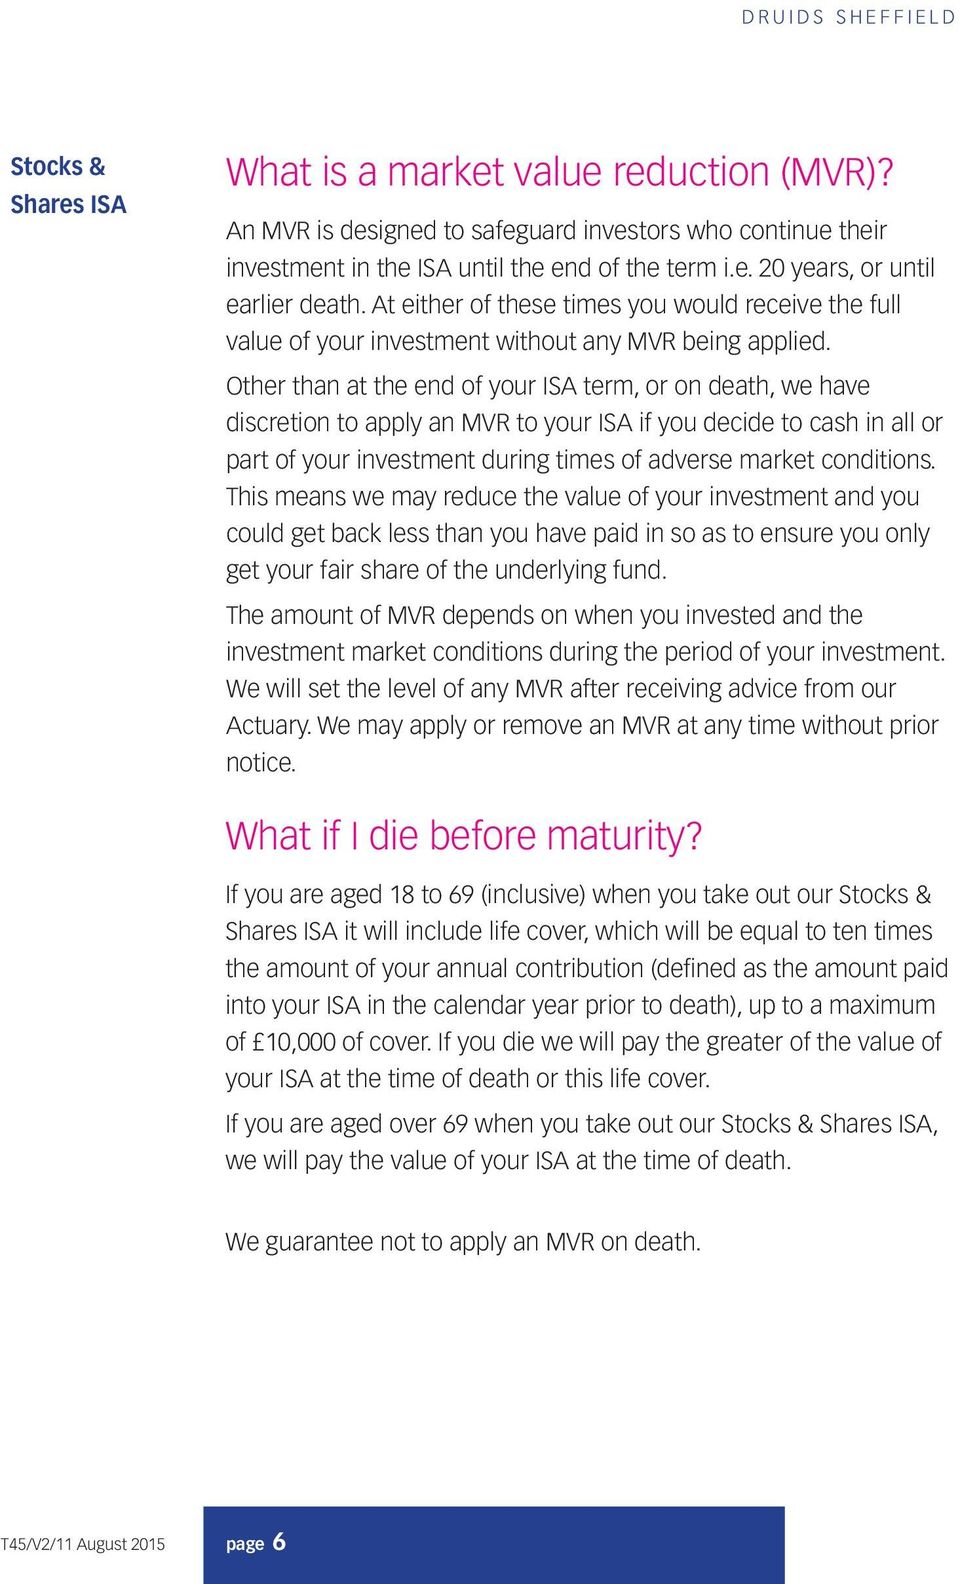 Other than at the end of your ISA term, or on death, we have discretion to apply an MVR to your ISA if you decide to cash in all or part of your investment during times of adverse market conditions.